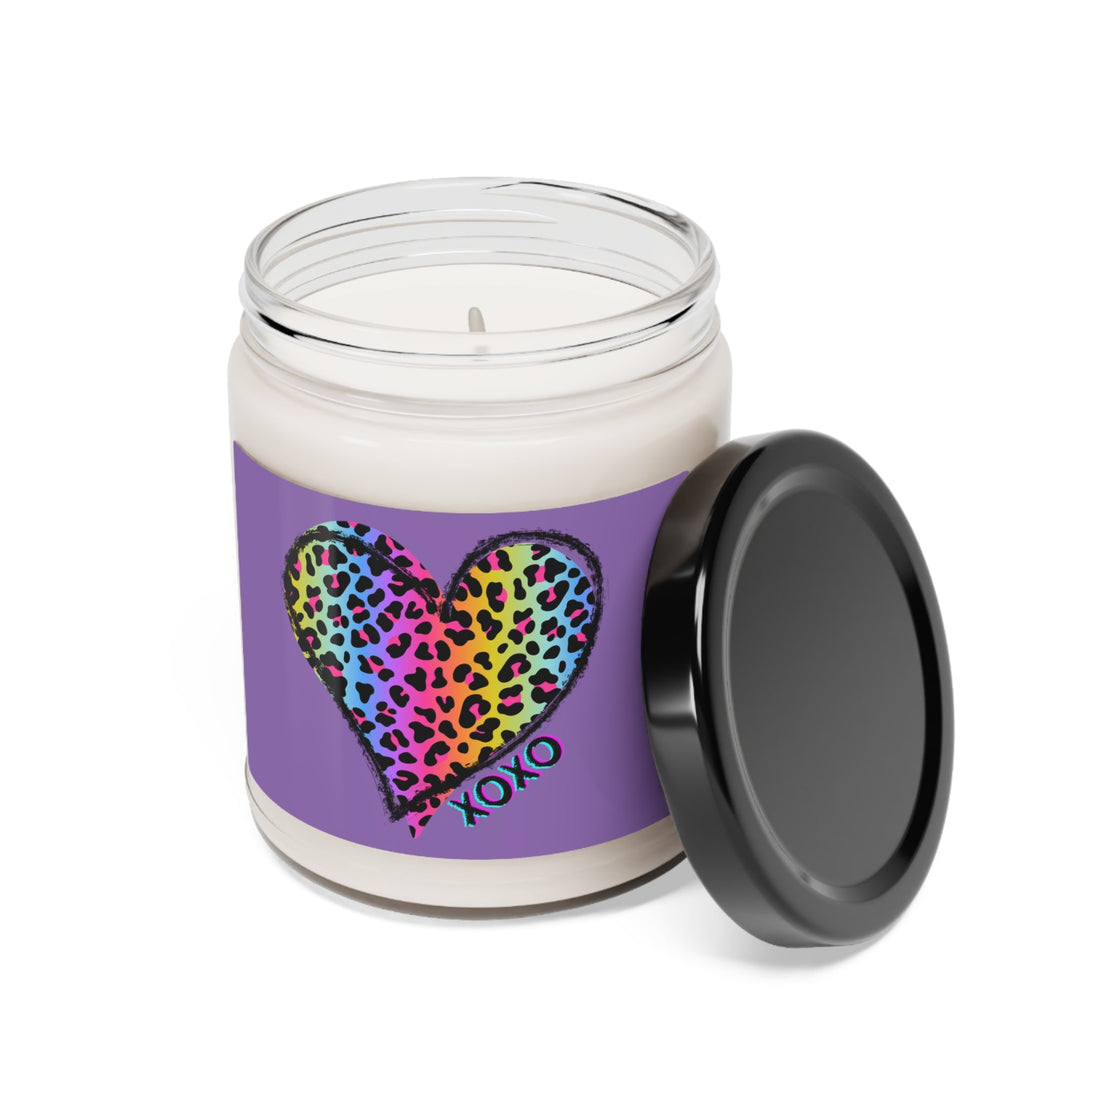 Sassy Love Scented Soy Candle, 9oz - Home Decor - Positively Sassy - Sassy Love Scented Soy Candle, 9oz